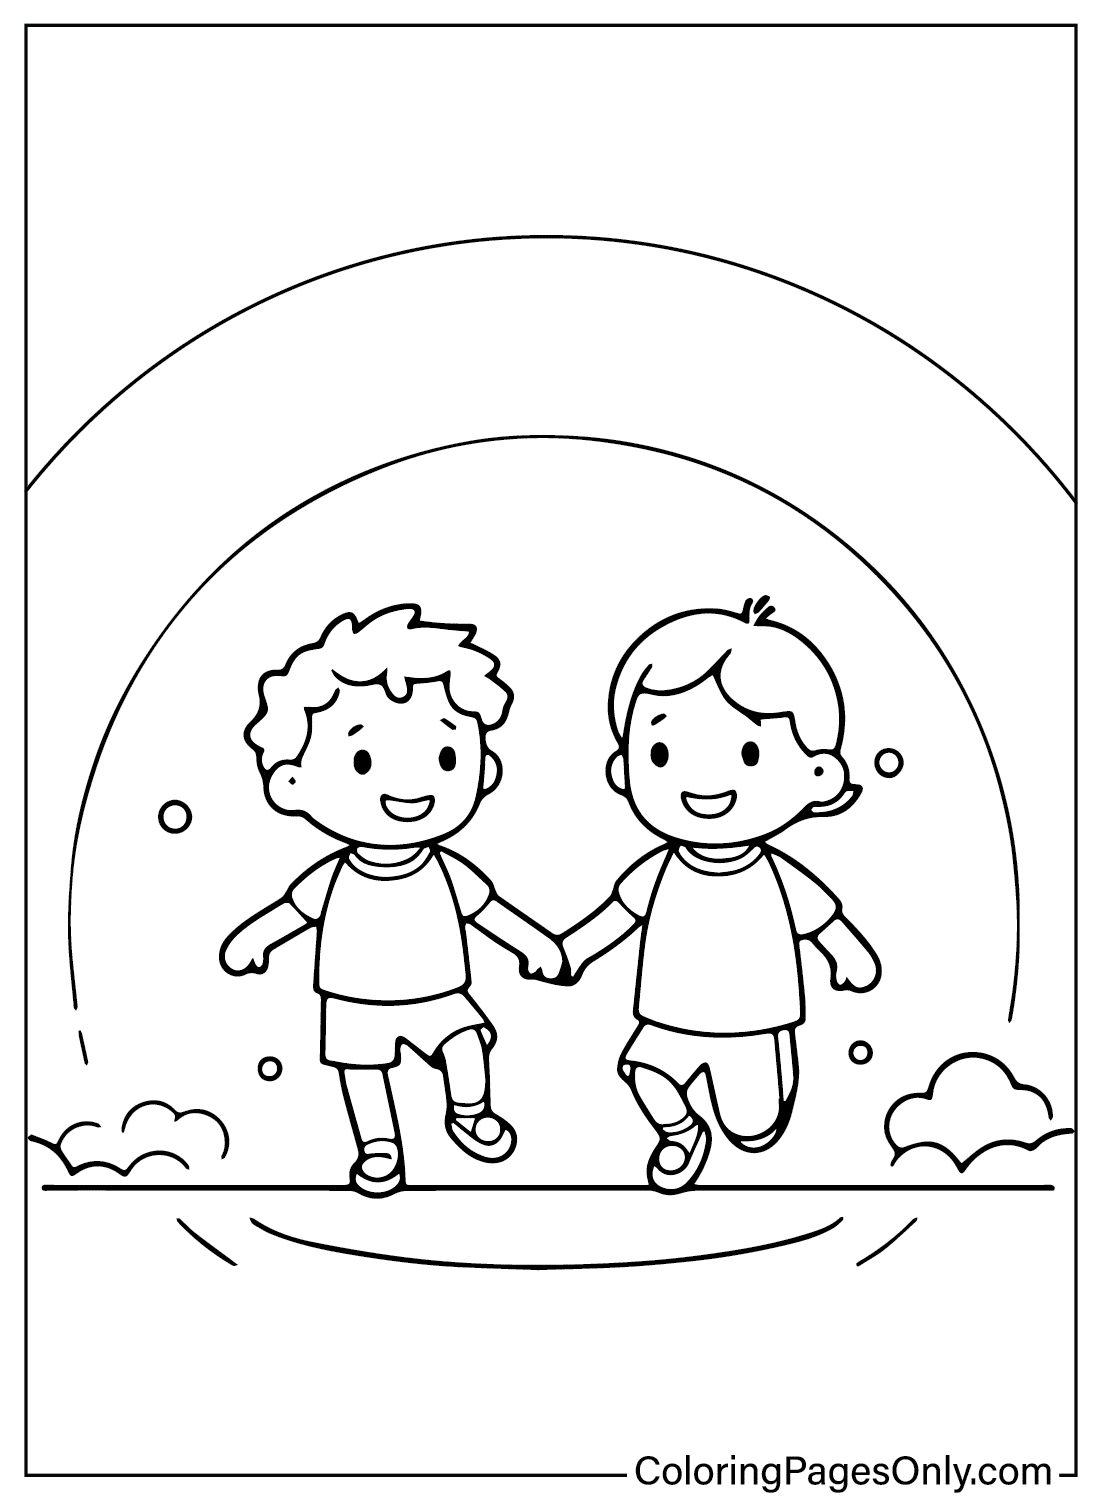 Coloring Page Children’s Day